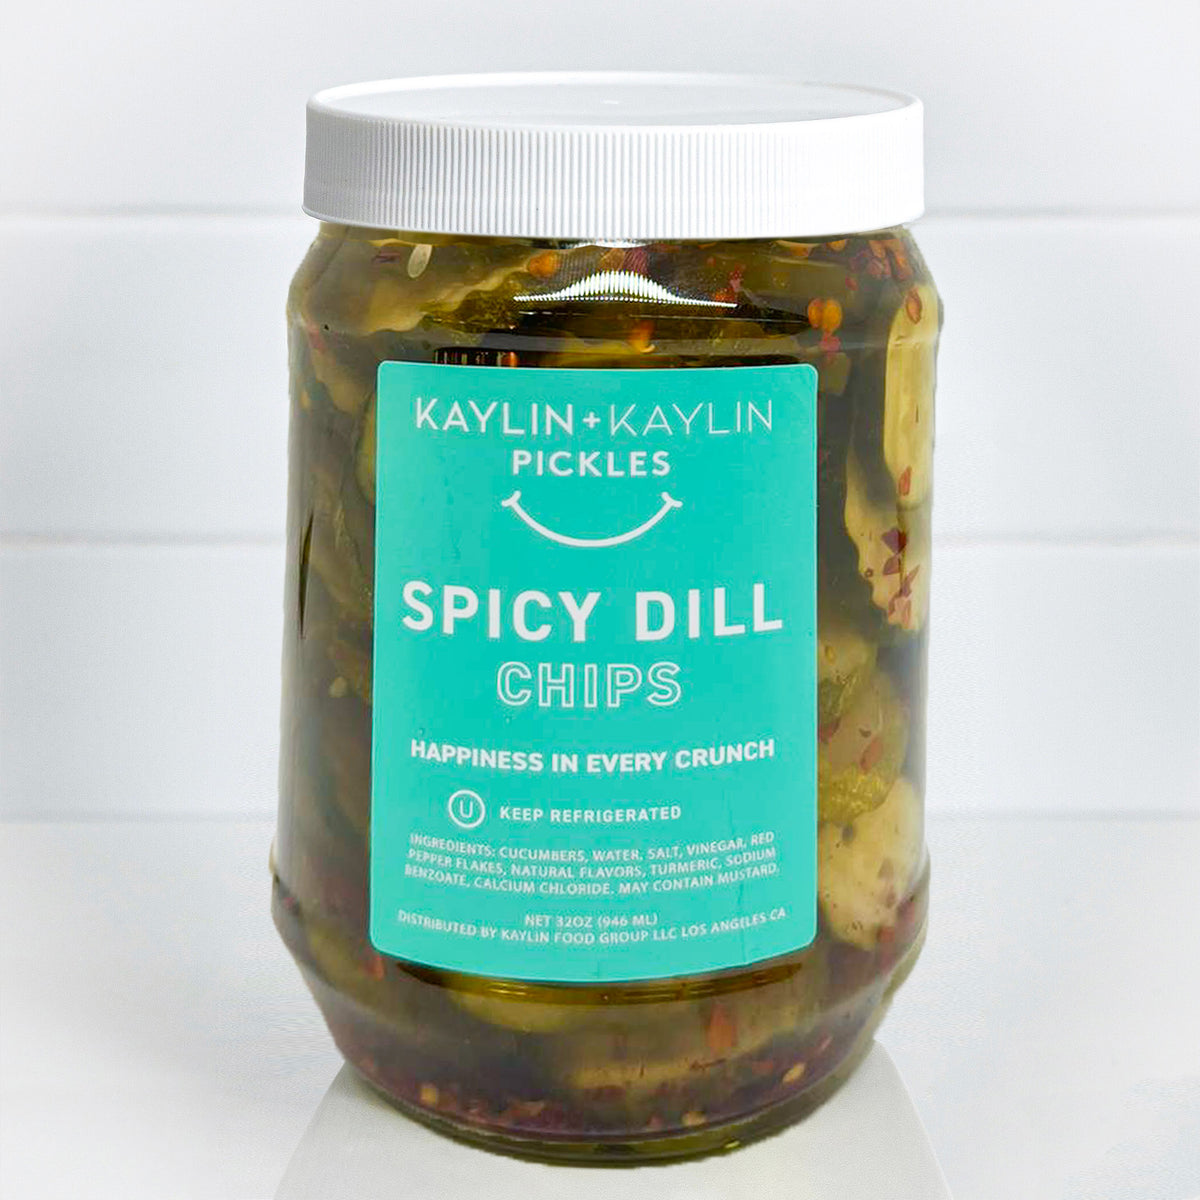 Spicy Dill Chips